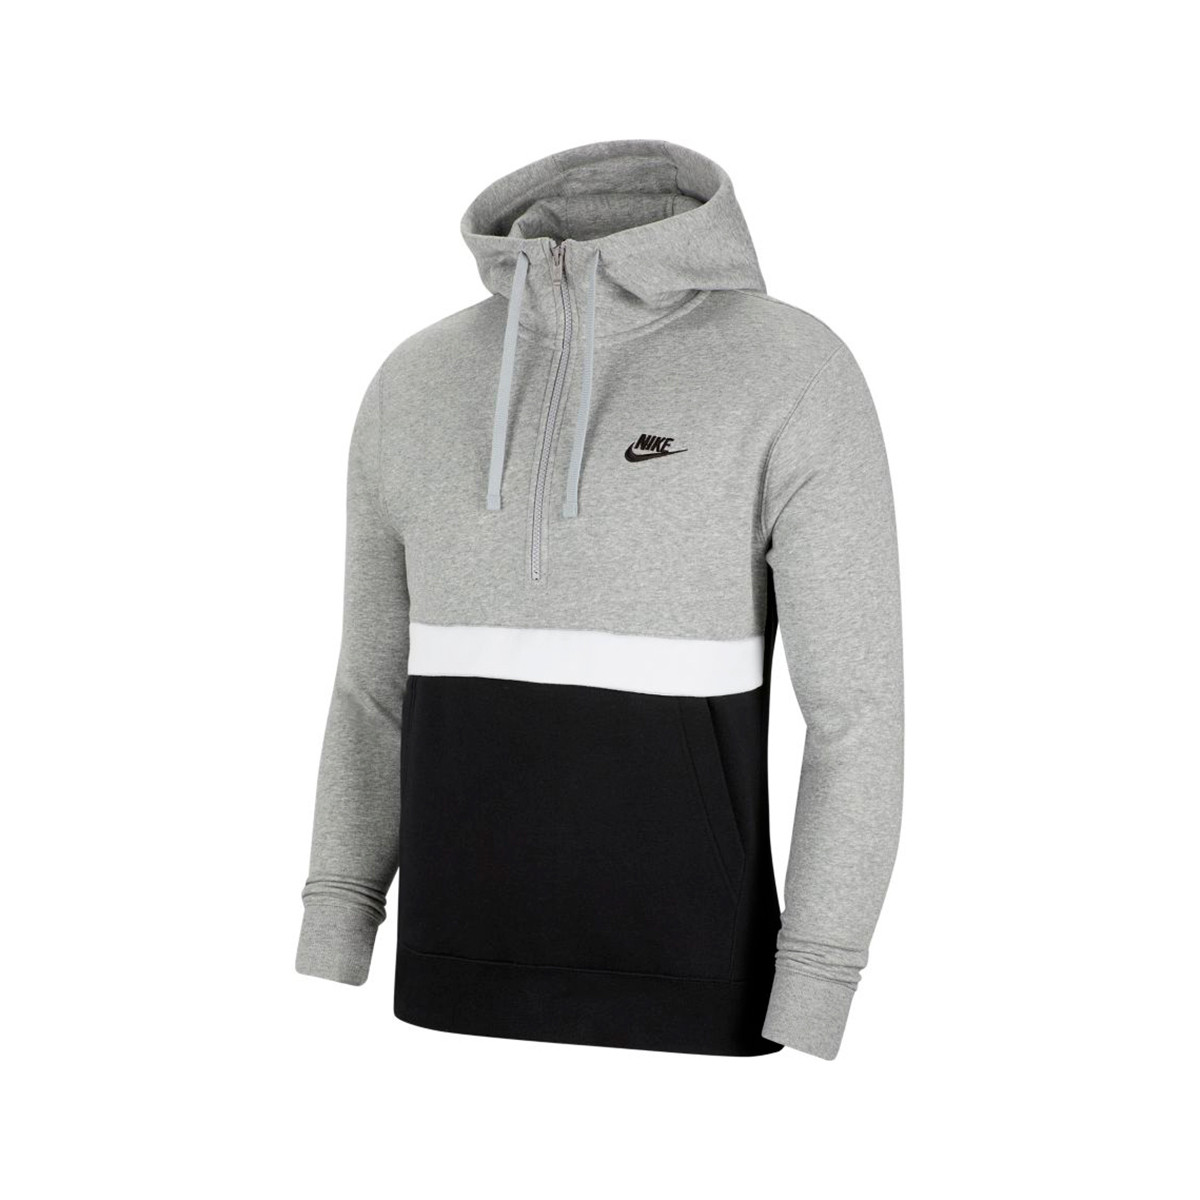 silver and black nike jacket